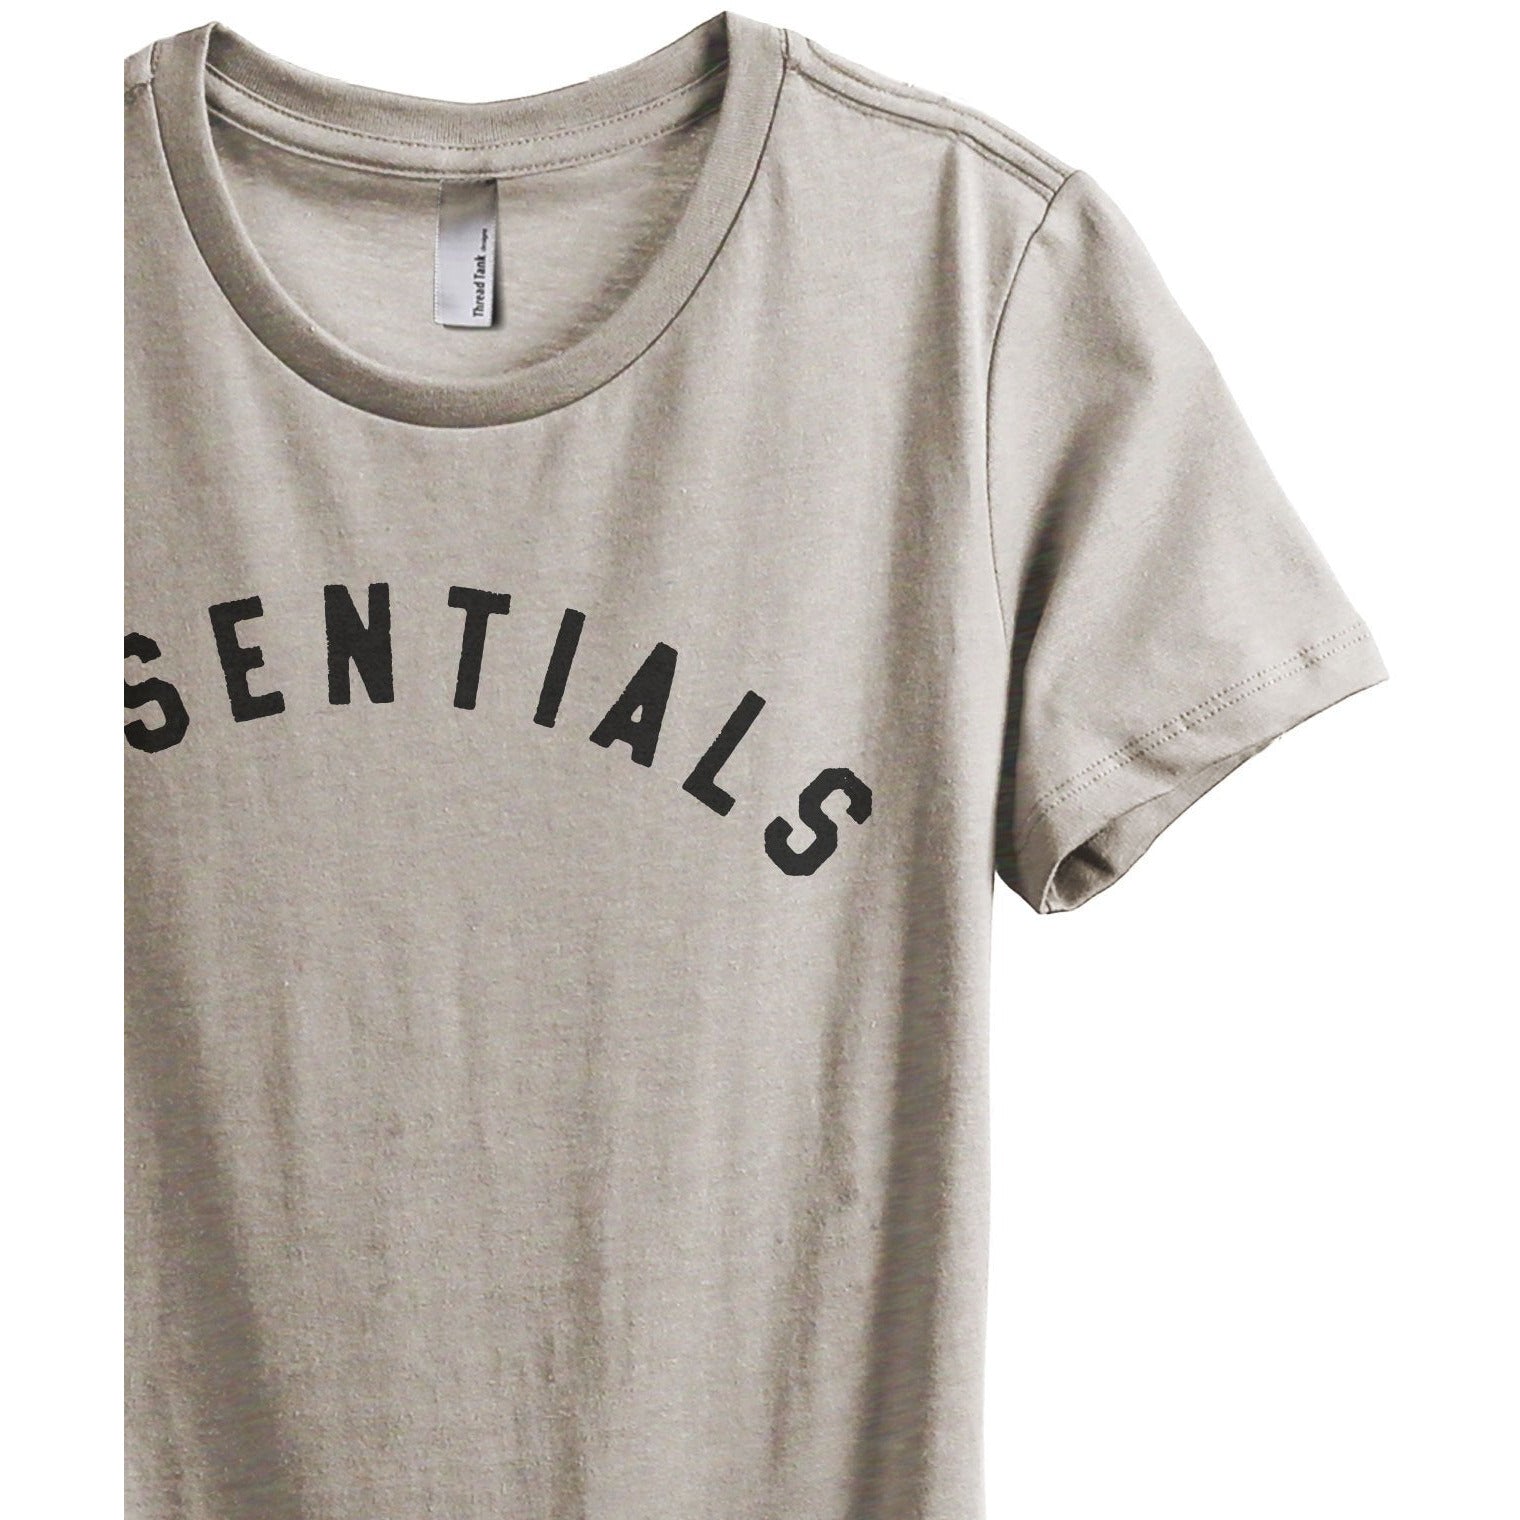 Essentials Women's Relaxed Crewneck T-Shirt Top Tee Charcoal Grey Zoom Details